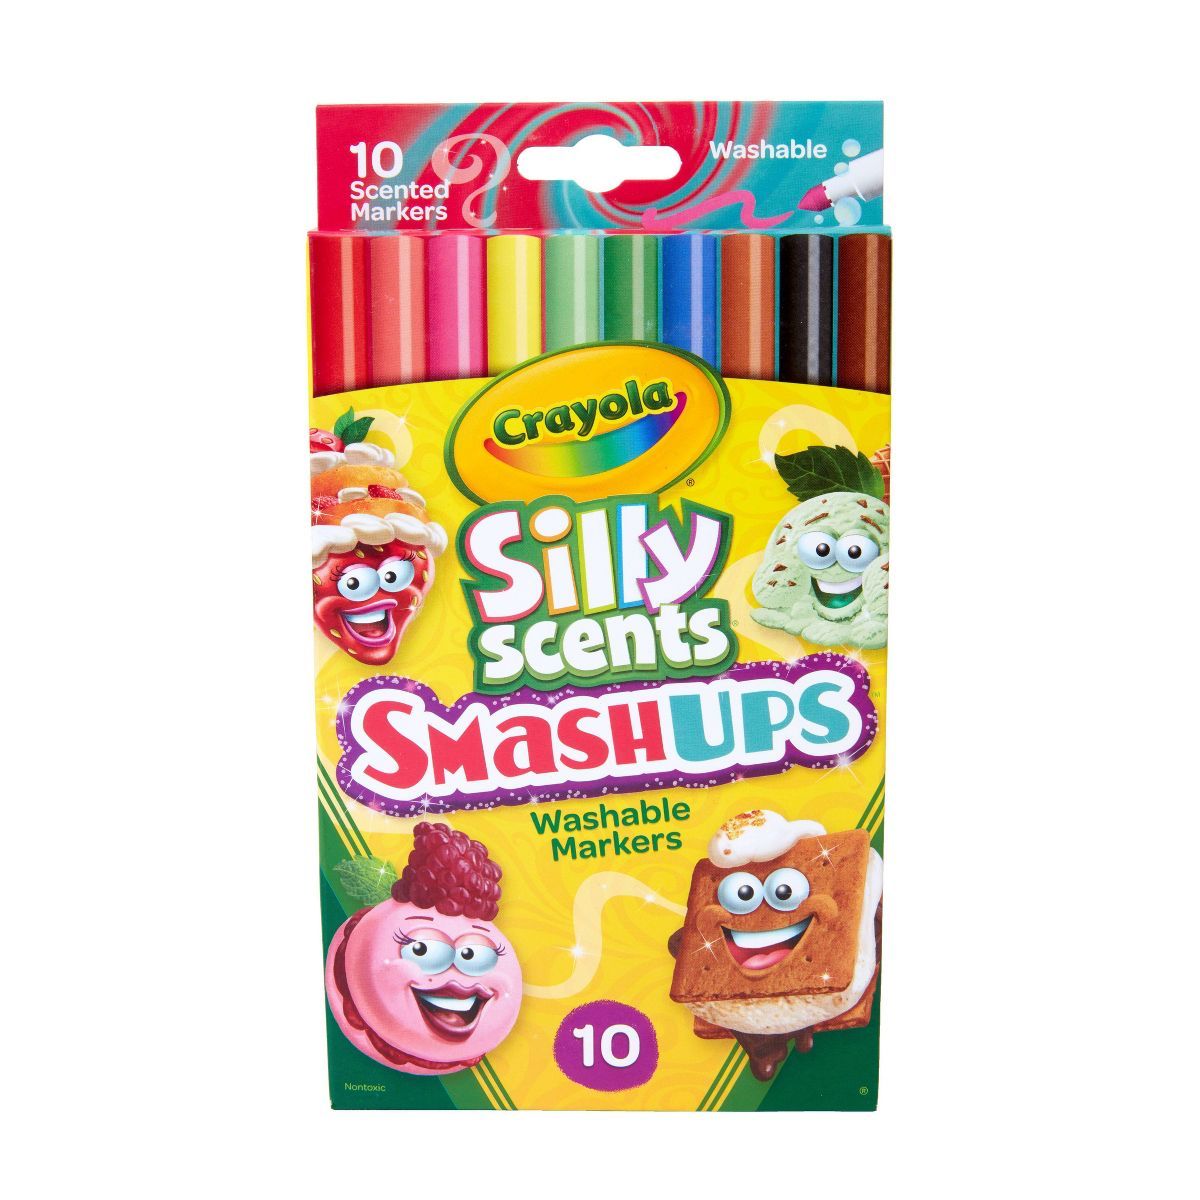 Crayola 10pk Silly Scents Smash Ups Slim Washable Markers | Target